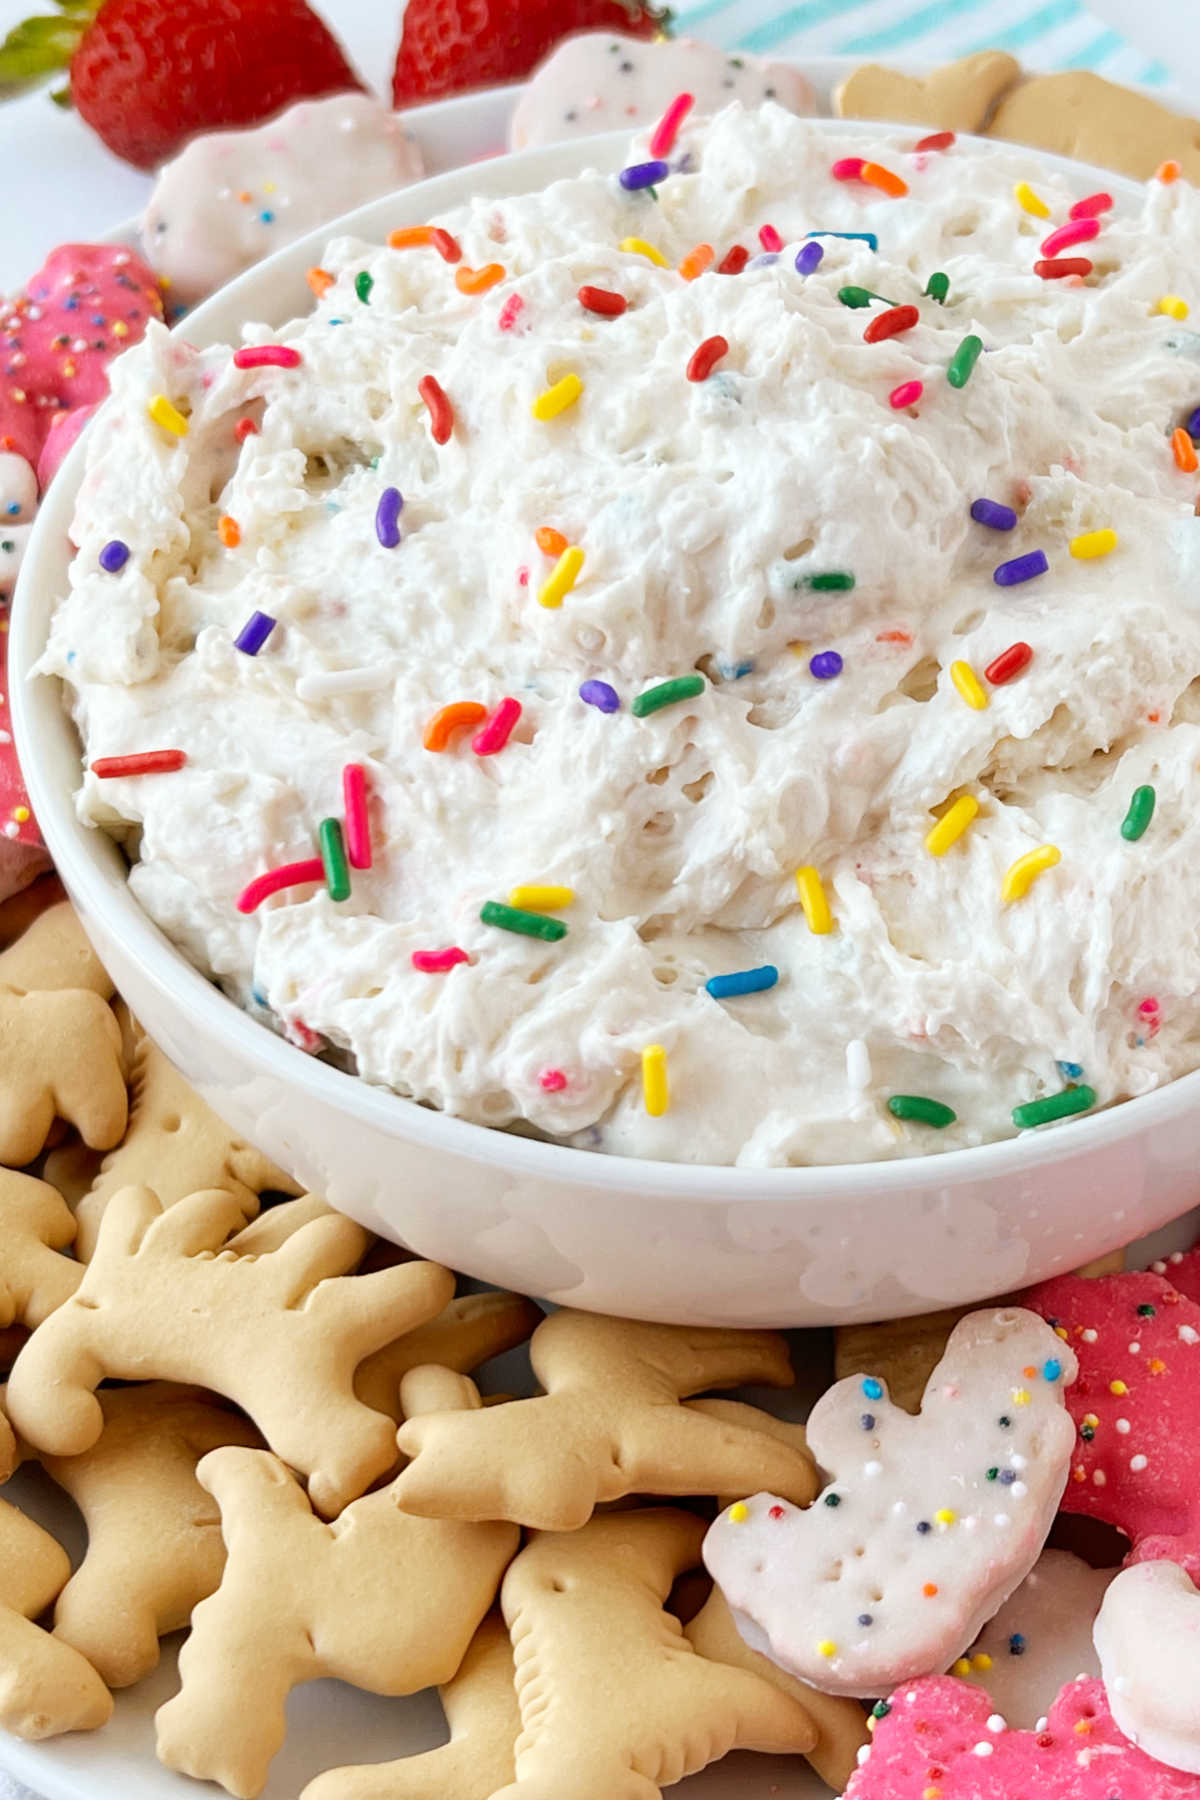 Dunkaroo dip (funfetti cake batter dip) with rainbow sprinkles in a serving bowl with animal crackers and circus crackers